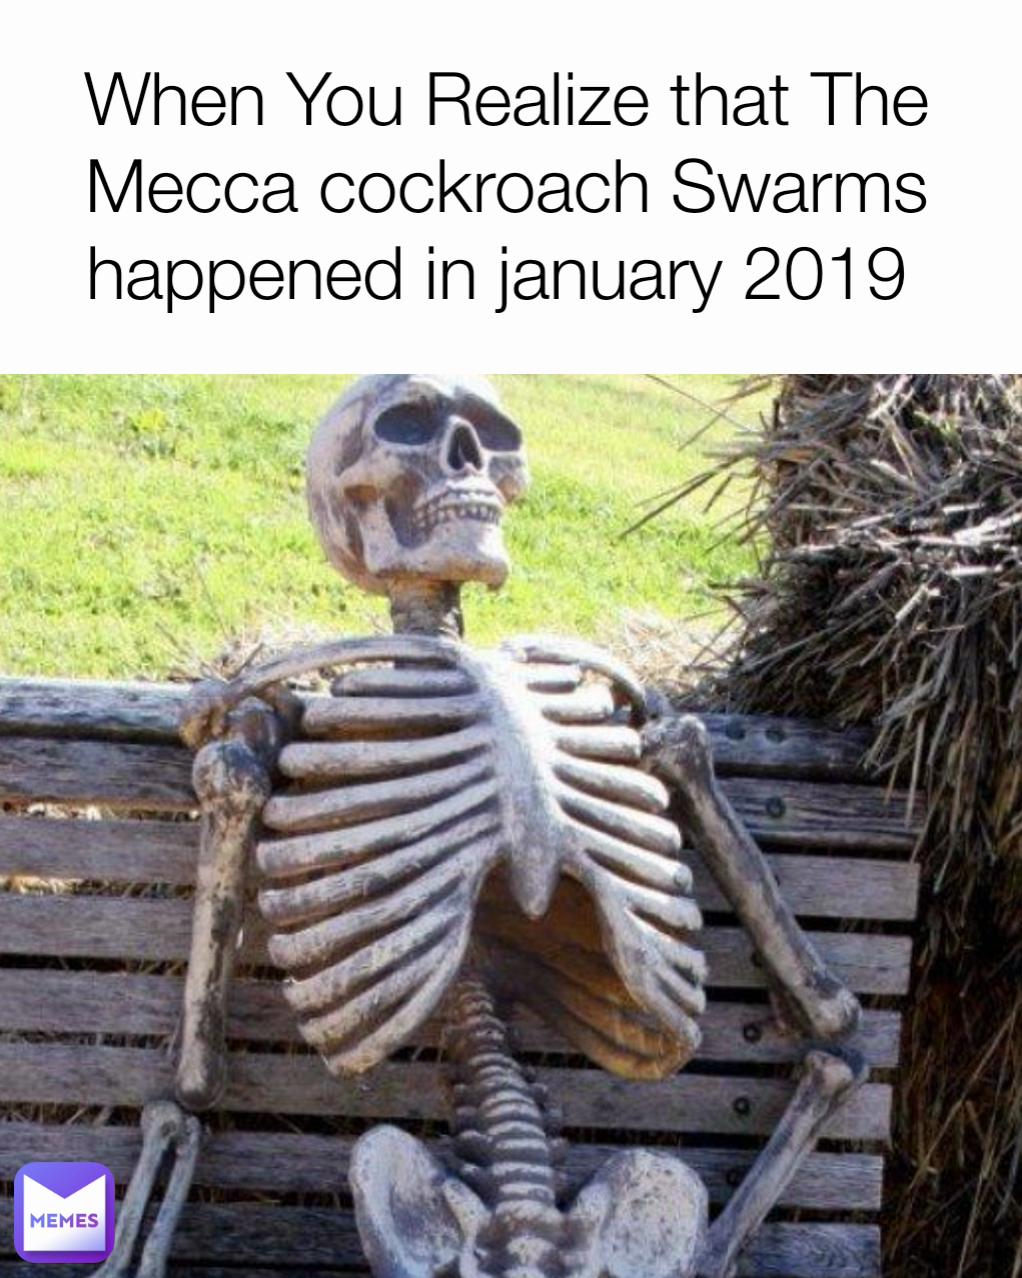 When You Realize that The Mecca cockroach Swarms happened in january 2019 